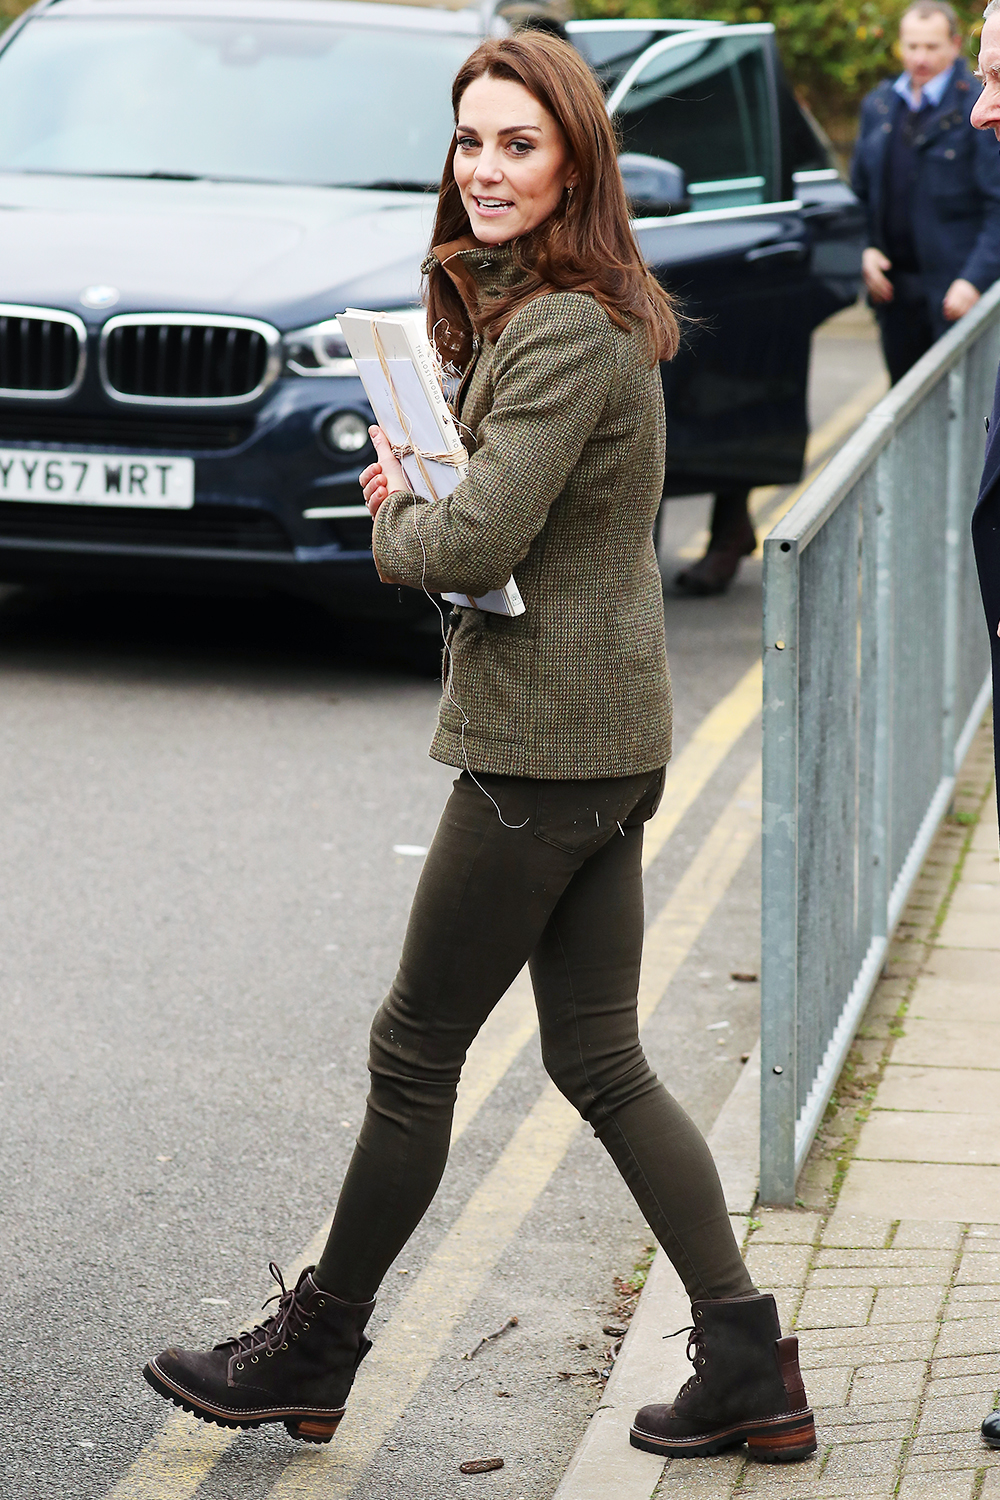 Kate Middleton Is Making Us Want to Buy These Boots | Who What Wear UK